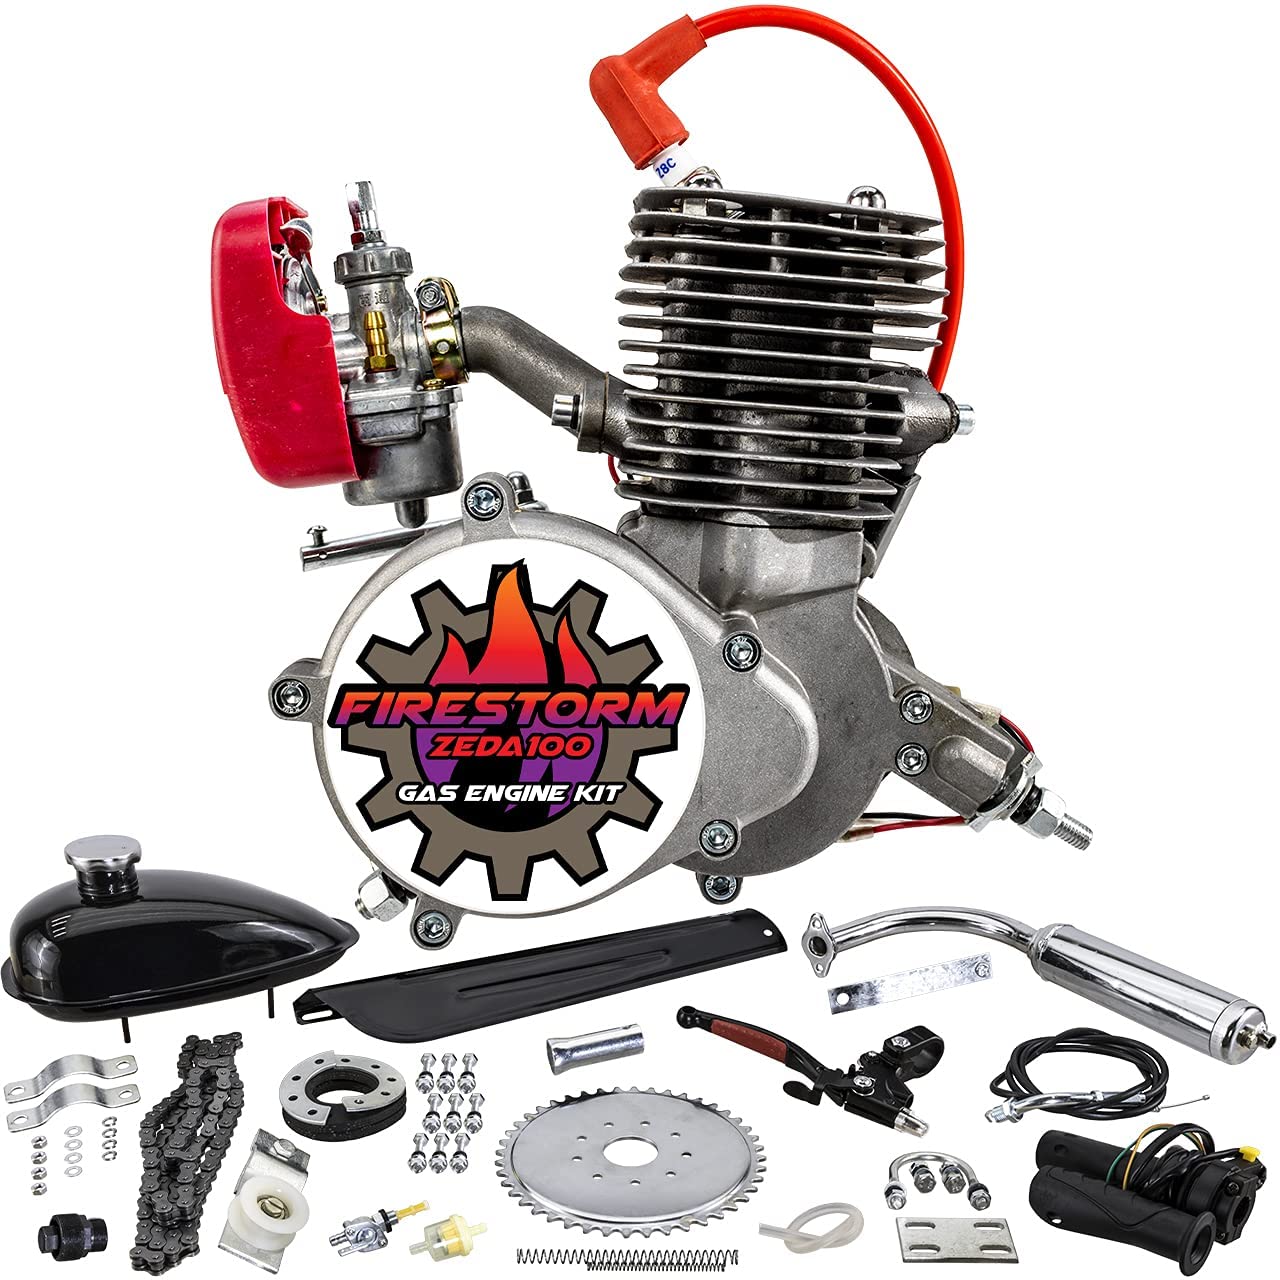 New Zeda 80 T-Belt Drive Complete 2 Stroke 80cc Bicycle Engine Kit -  Firestorm Edition | Bicycle engine, Bicycle engine kit, Bike engine kit